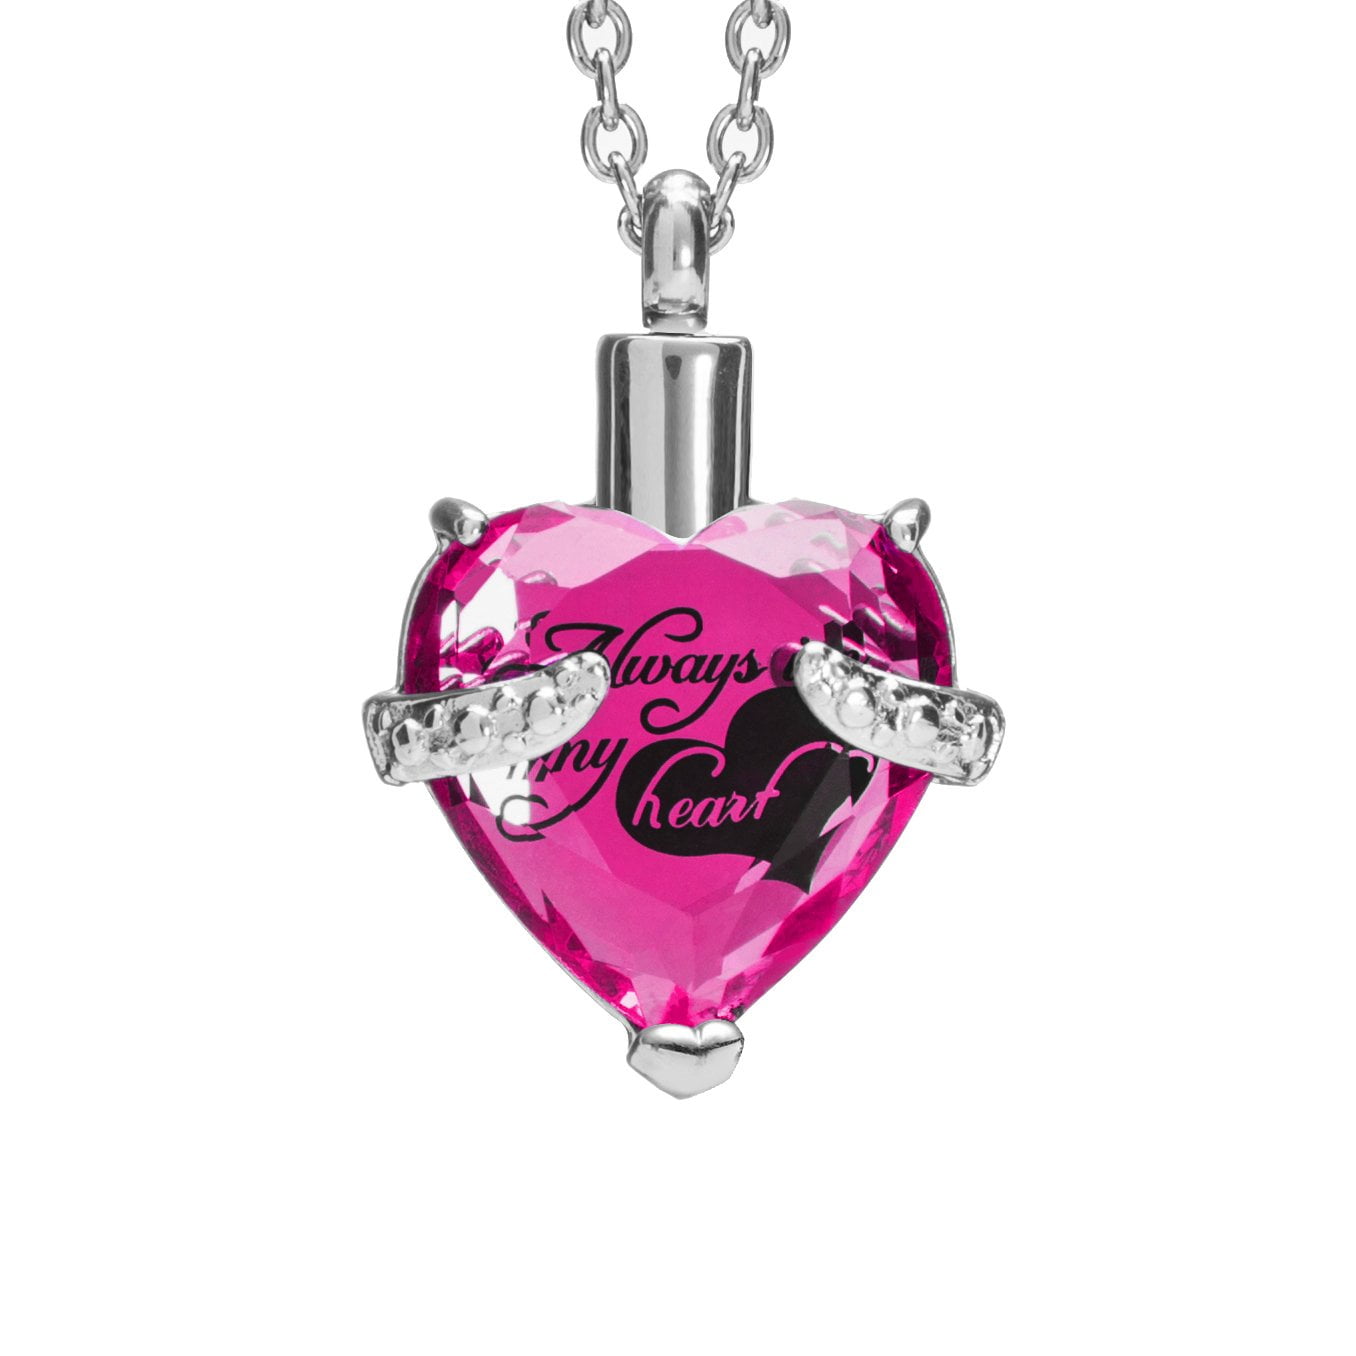 Cremation Memorial Keepsake Urn Pendant Necklace with Gift Box 